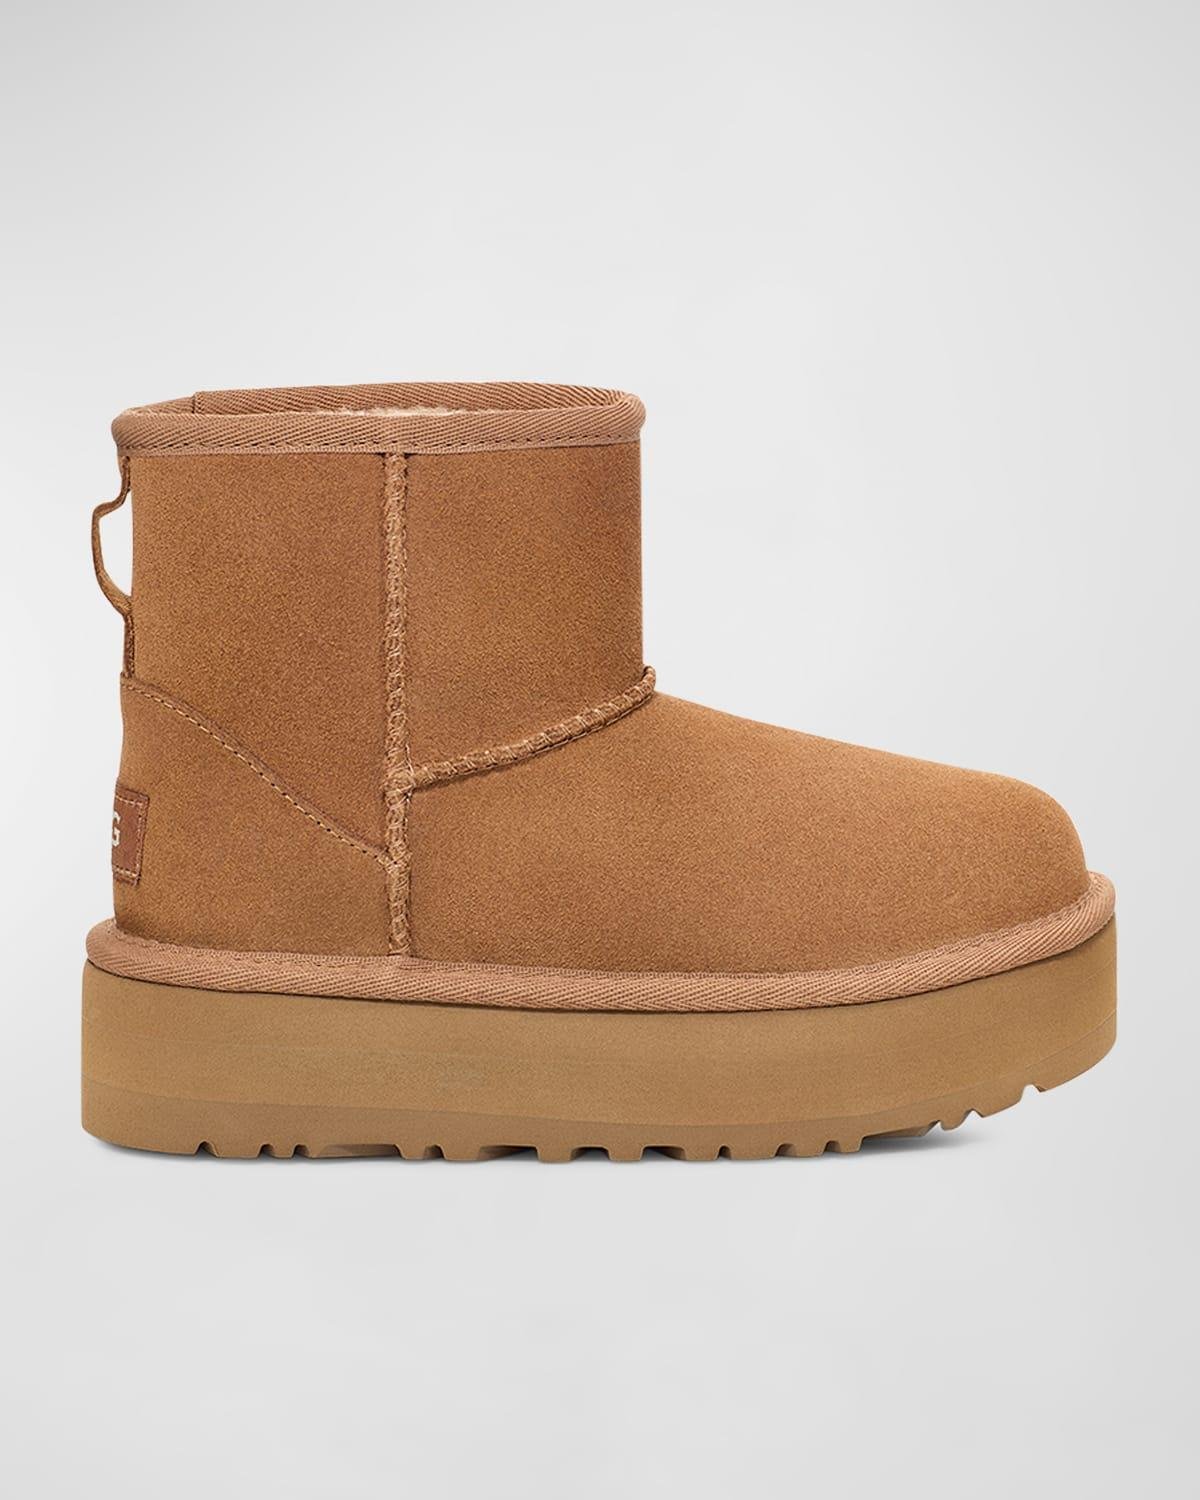 Girl's Classic Mini Platform Suede Booties, Kids by UGG